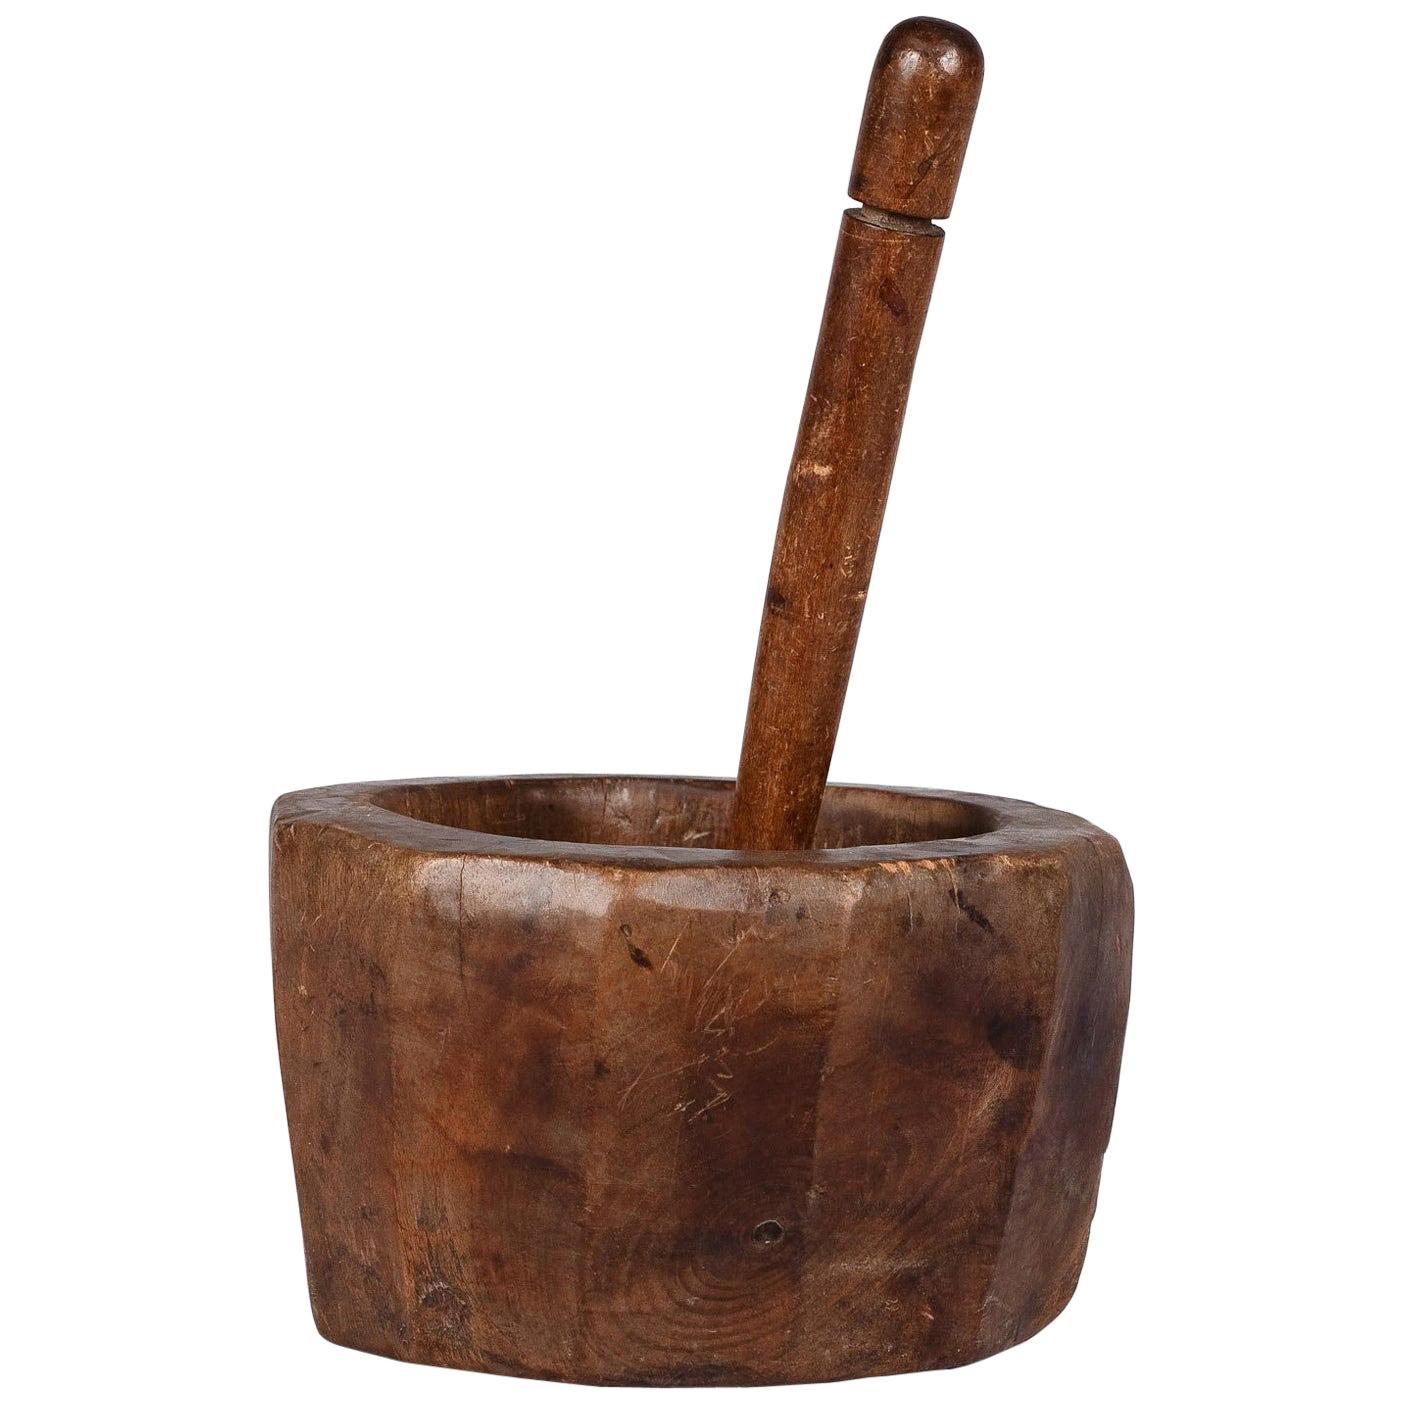 French Wooden Mortar and Pestle, Early 1900s